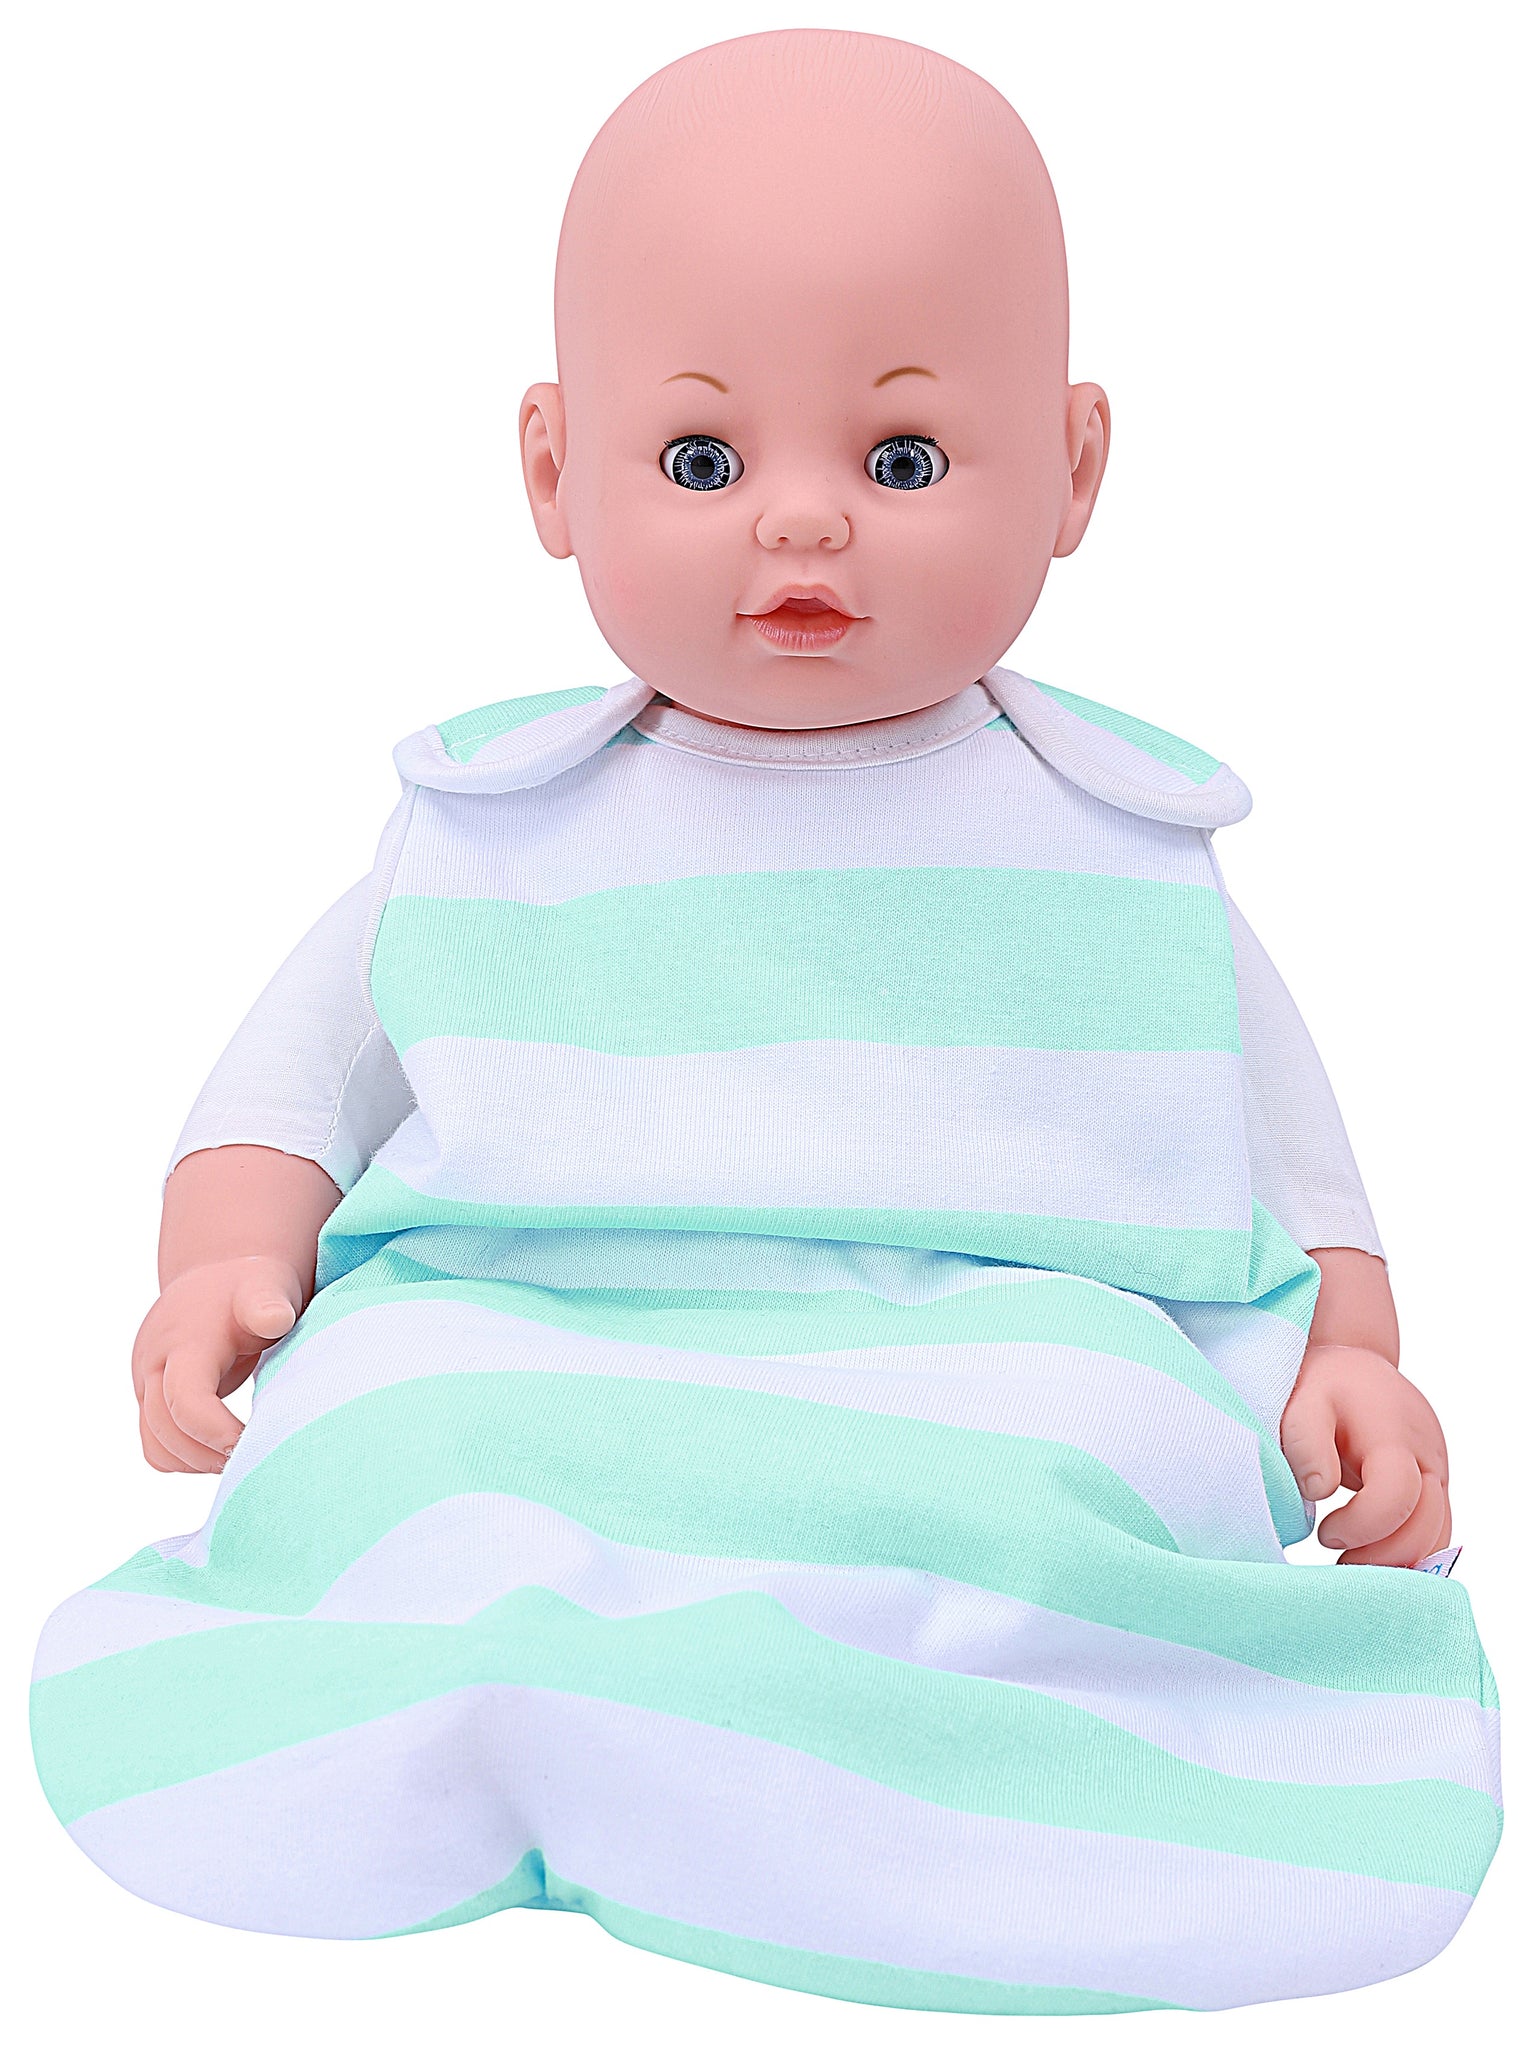 Snoozebag Doll Baby Sleeping Bag Suitable For all Child Toy Dolls Accessory 100% Cotton - Island Paradise